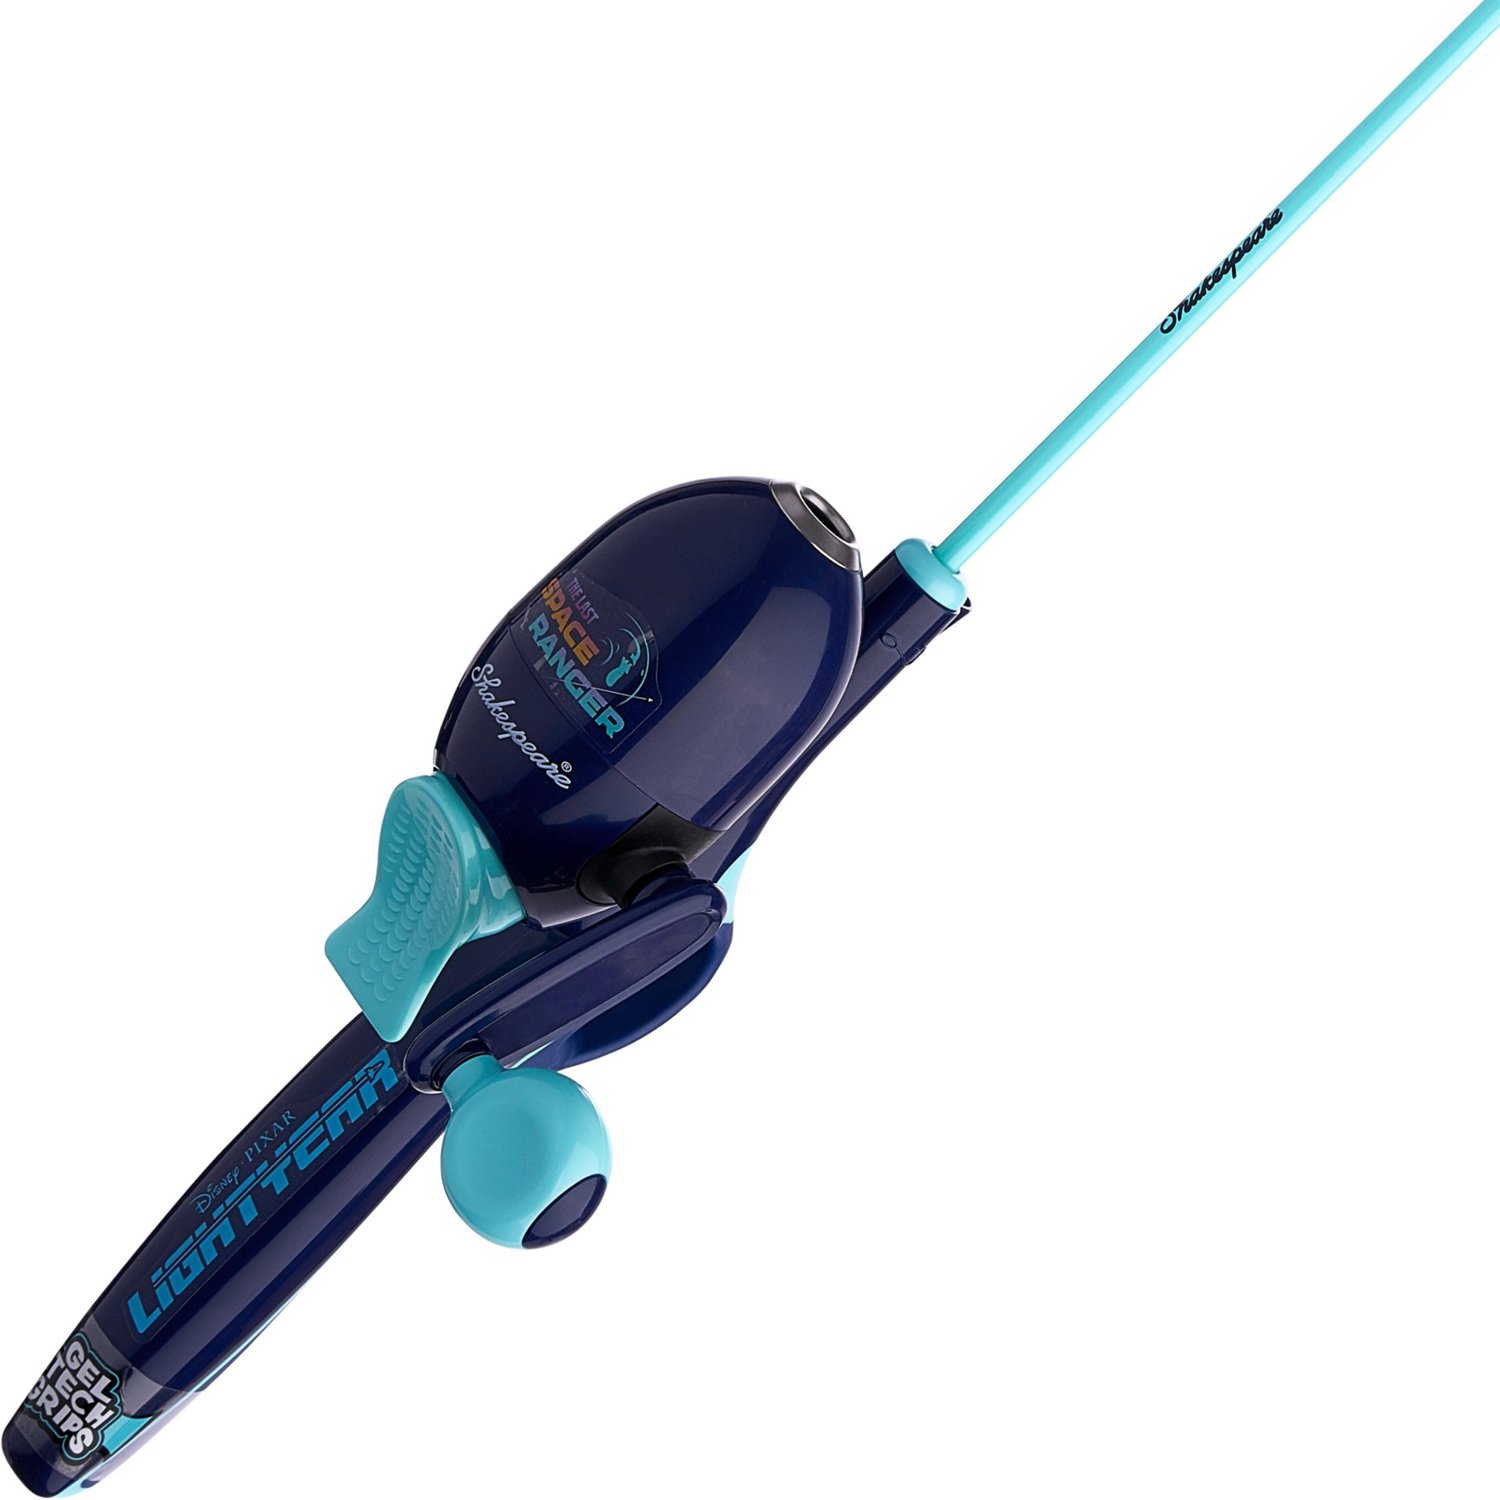 Shakespear Disney Pixar Toy Story 4 Fishing Pole 2ft 6in All In One Fishing